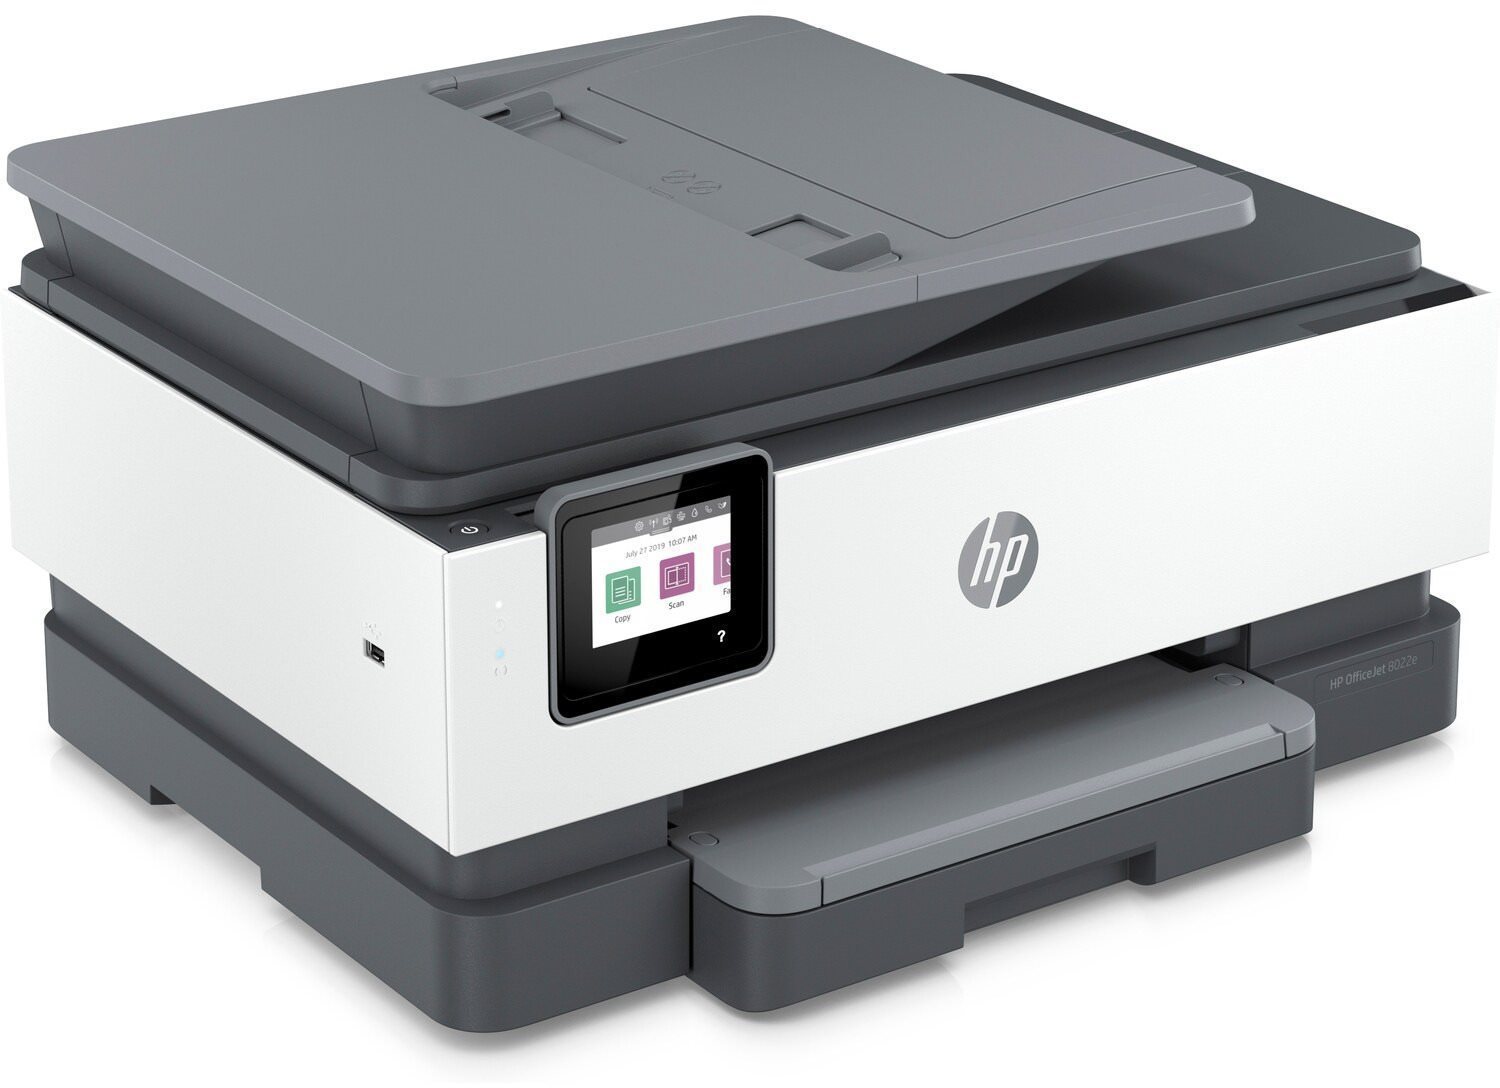 Inkjet Printer HP OfficeJet Pro 8022e All-in-One Lateral view